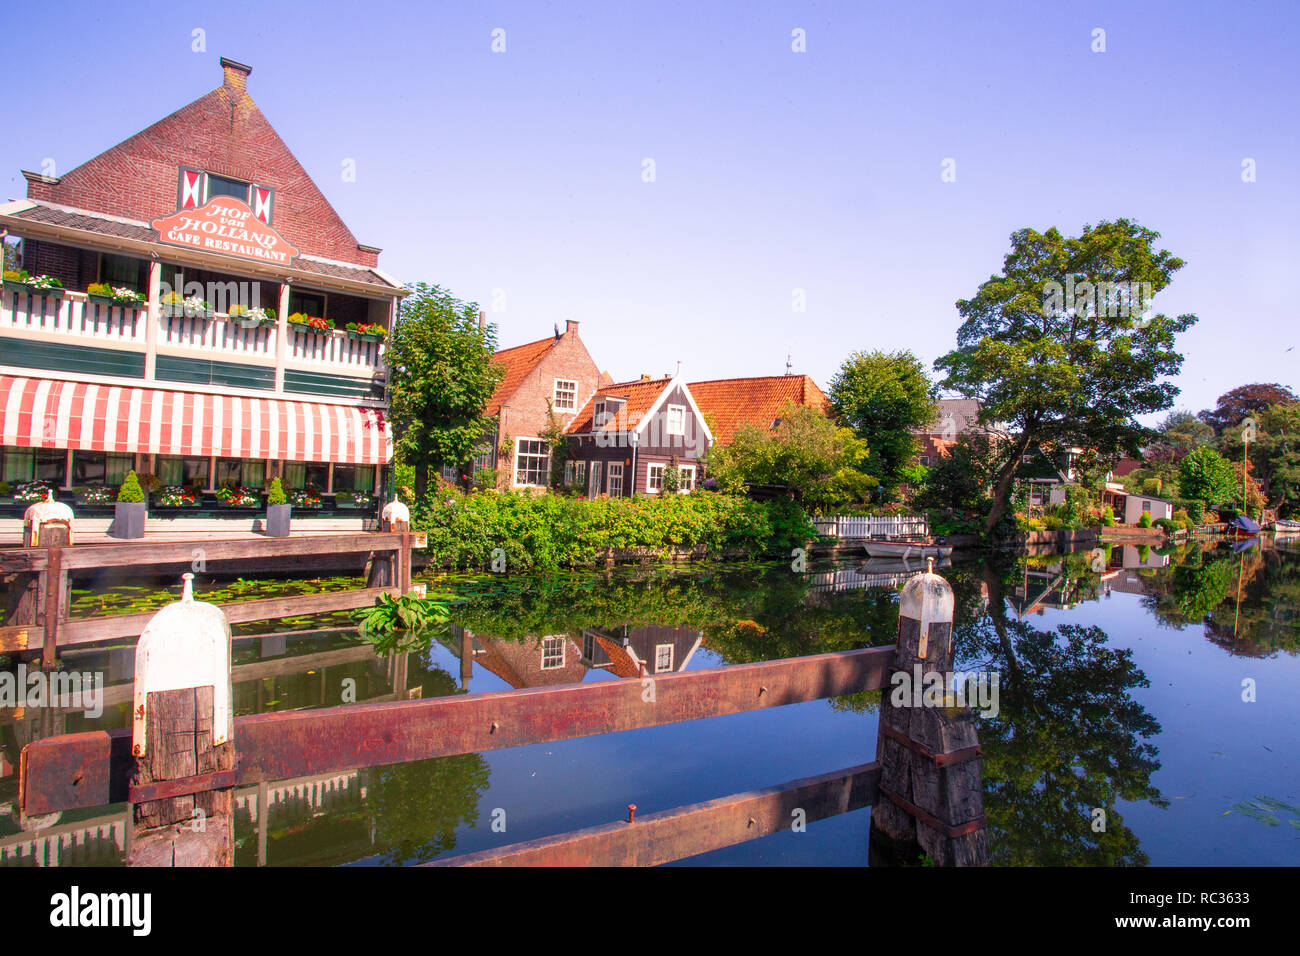 Scene from picturesque cheese-making town of Edam, Holland with historic architecture and canal Stock Photo